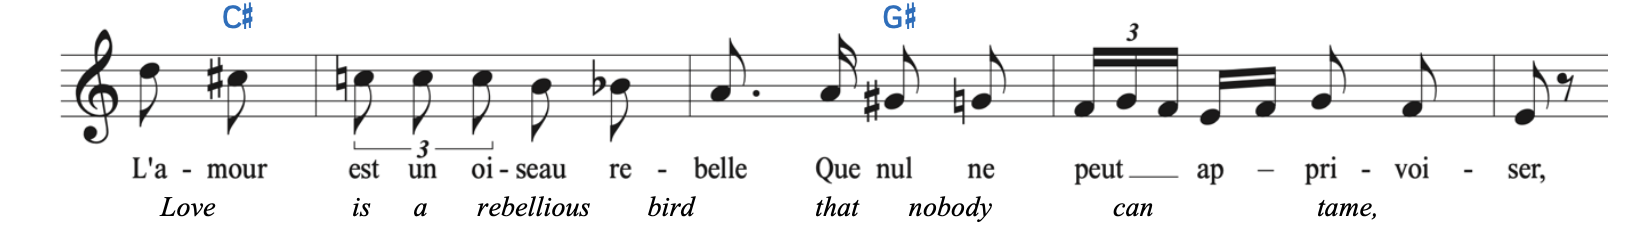 Example from Bizet's "L'amour est un oiseau rebelle," uses parts of the chromatic scale, but uses sharps when the scale descends. The pitches are D, C-sharp, C, B, B-flat, A, G-sharp, G, and F.